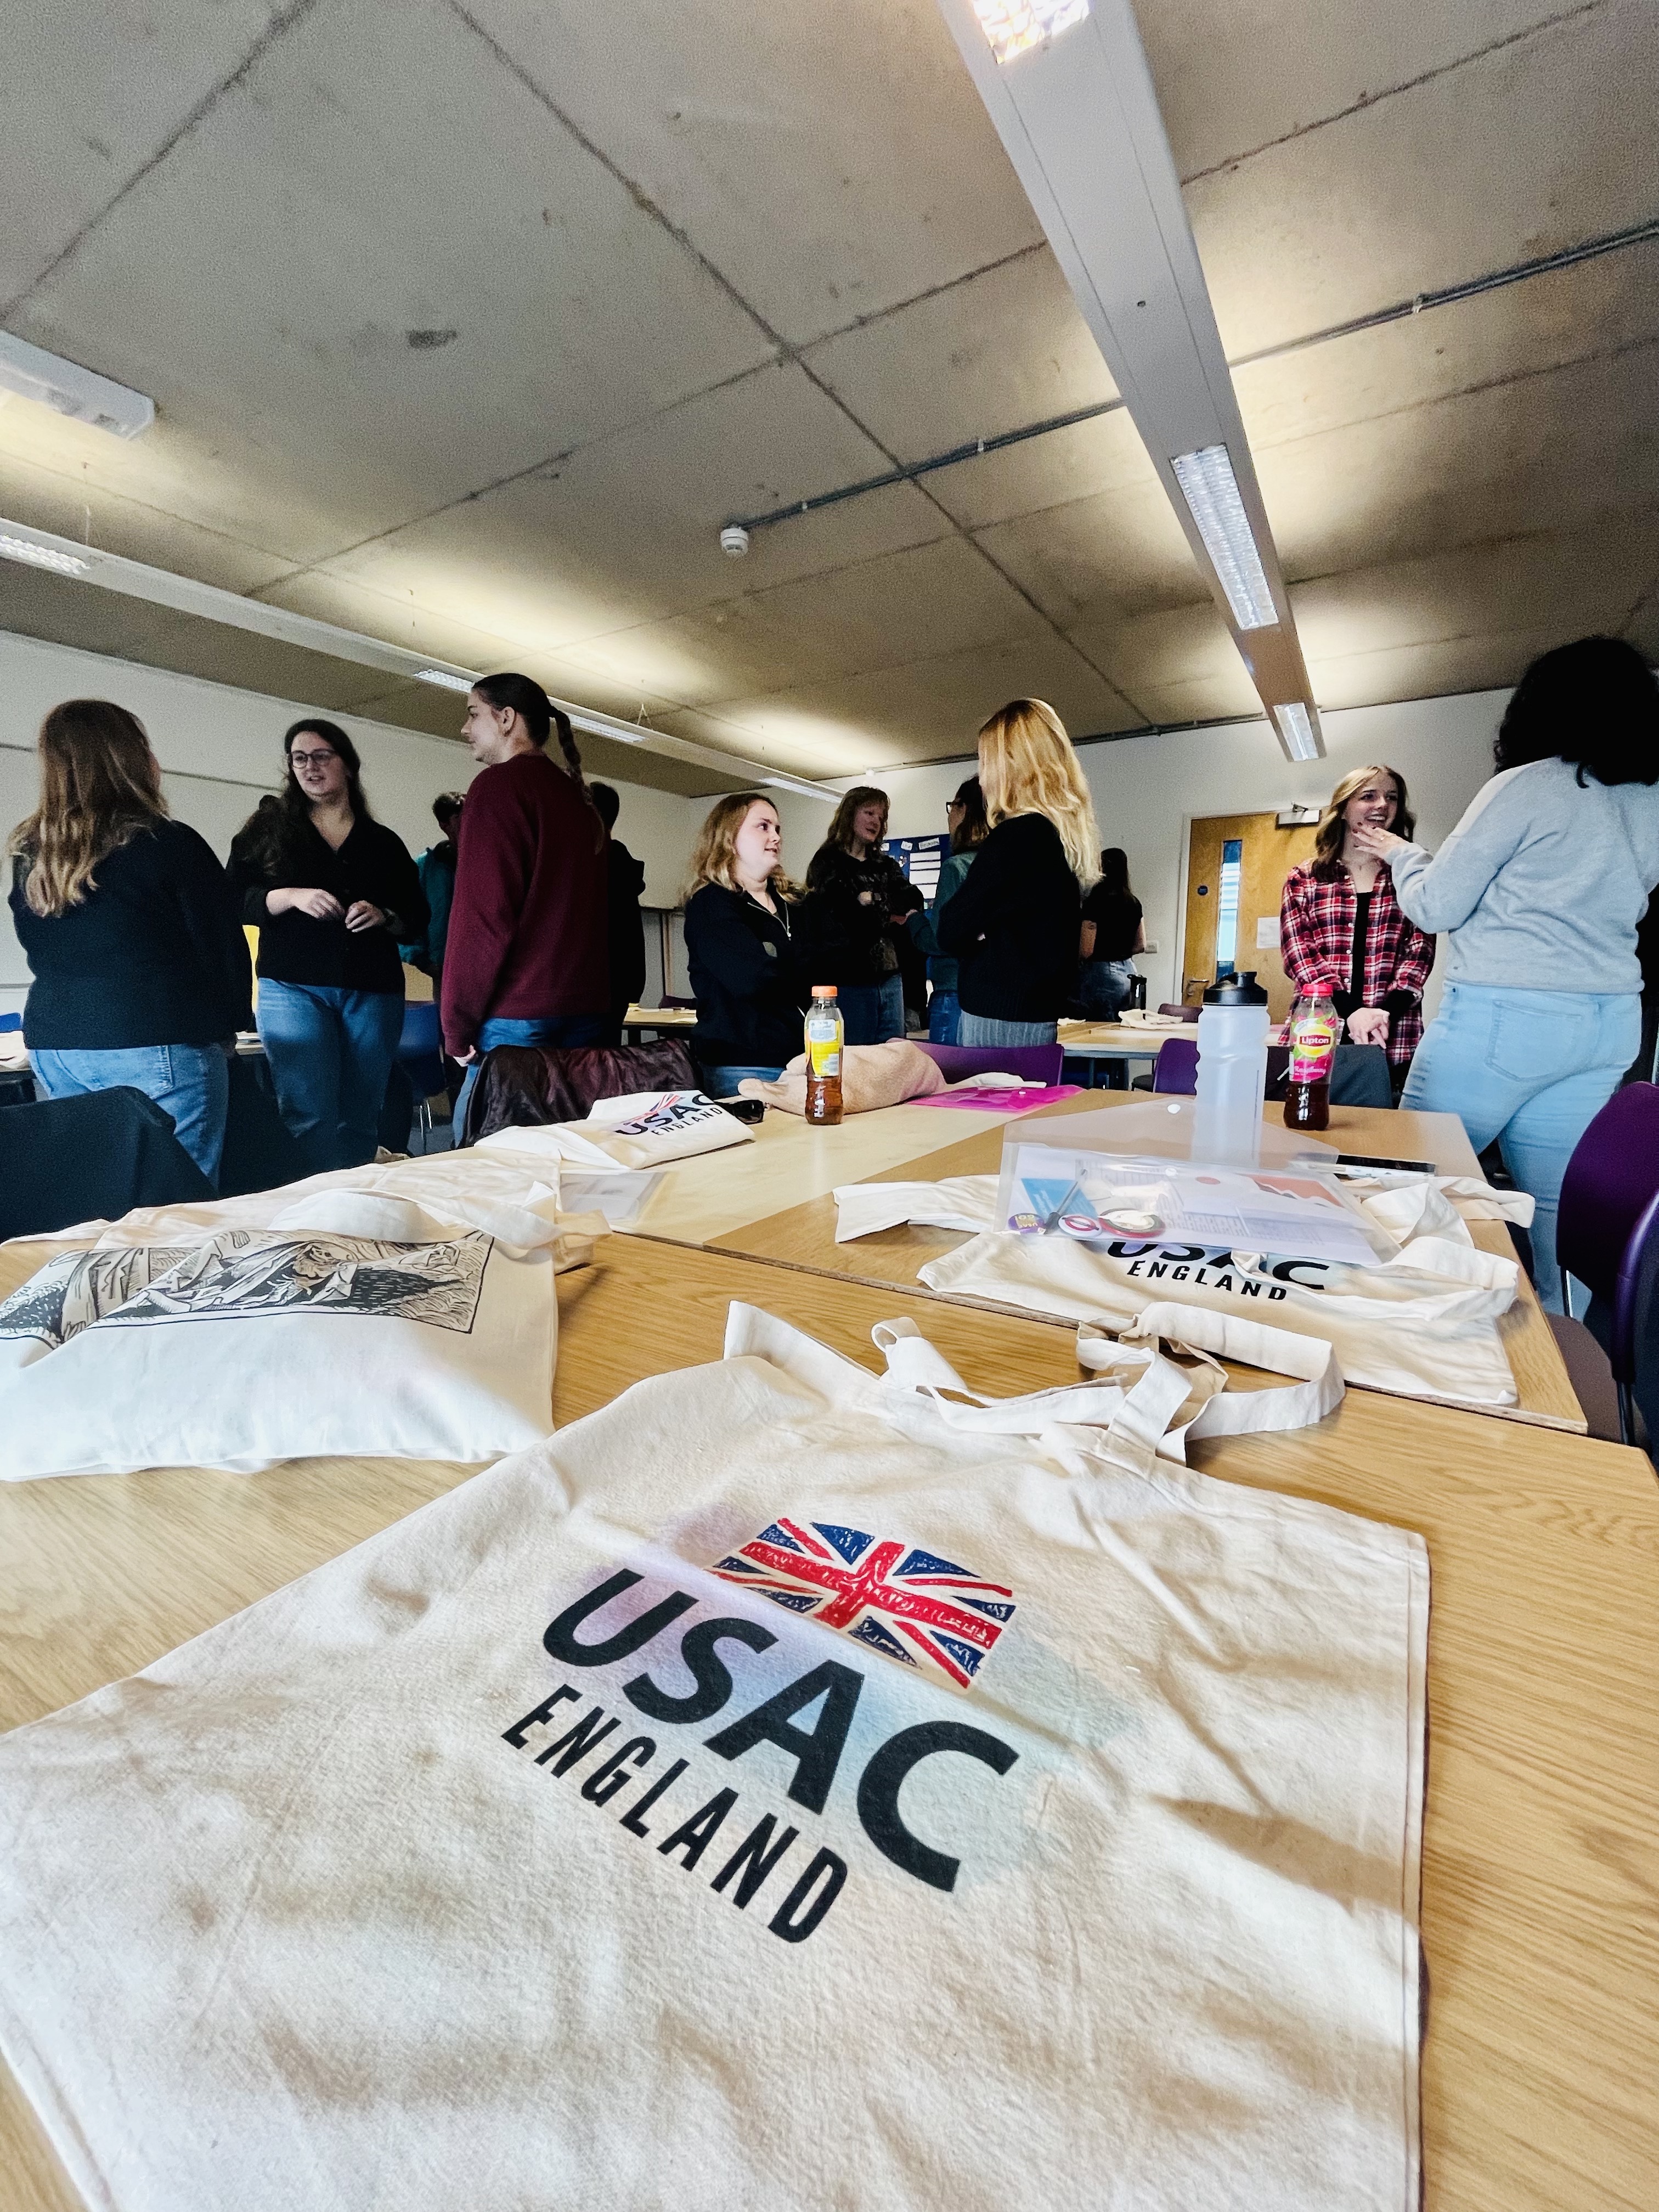 A table with a tote bag with USAC England and the British flag on it with students conversing in the background